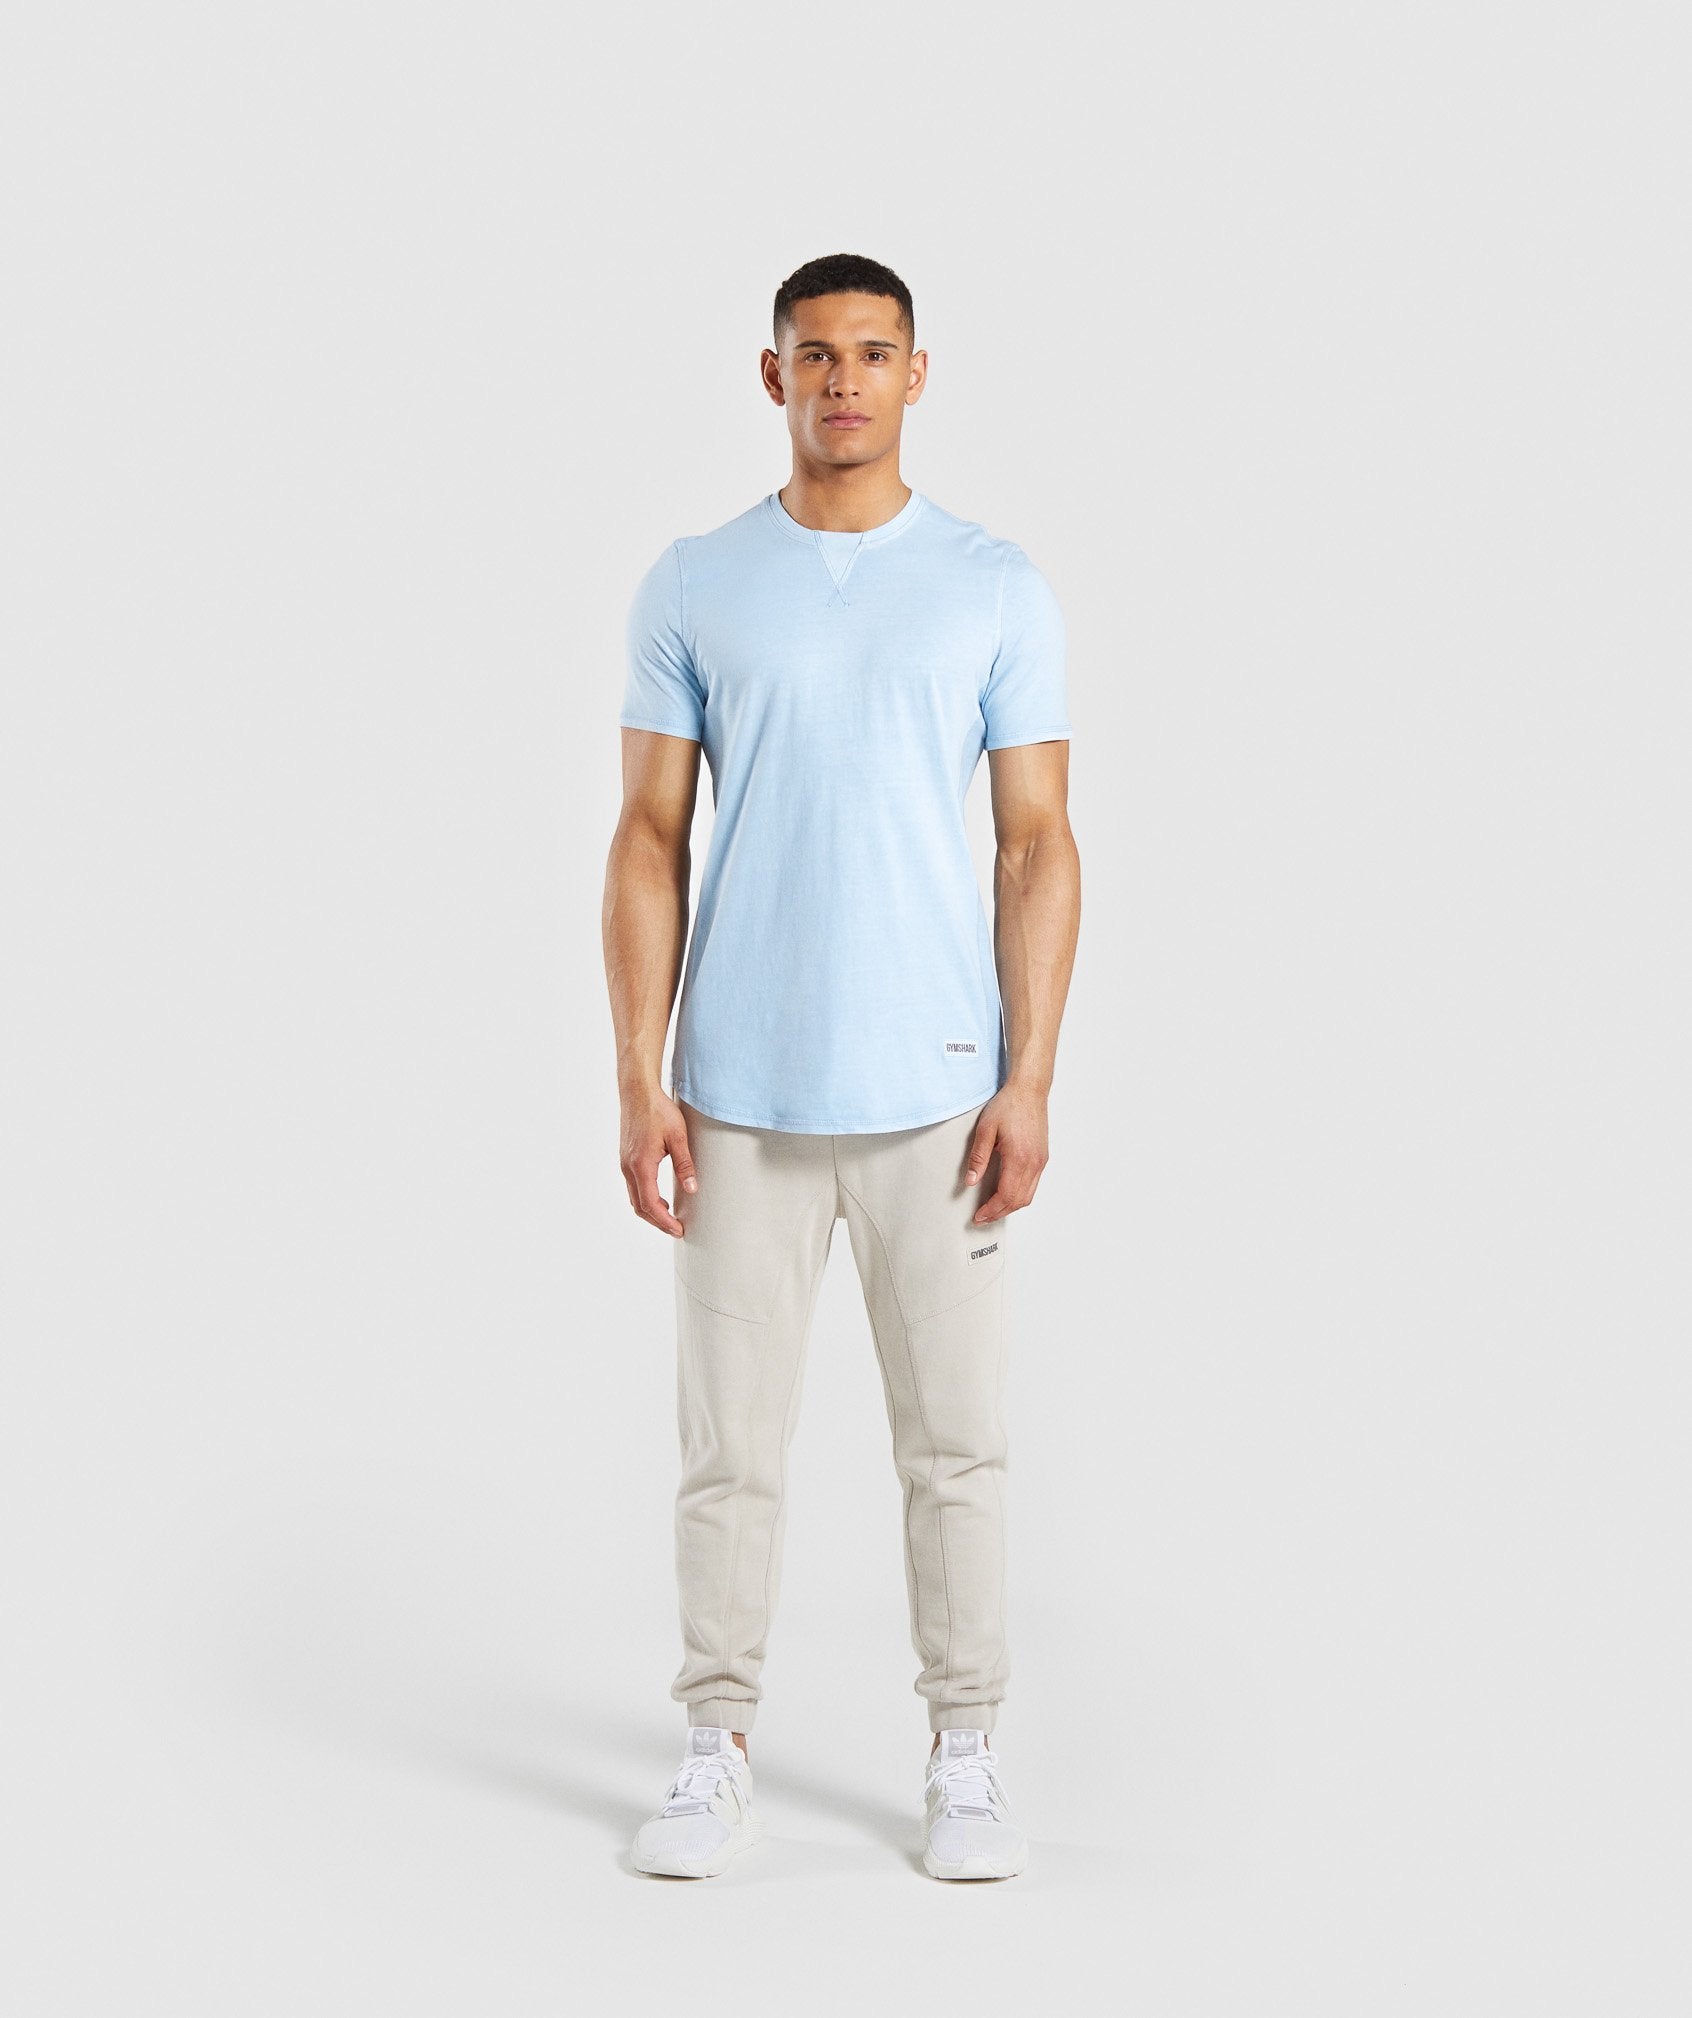 Laundered T-Shirt in Light Blue - view 3